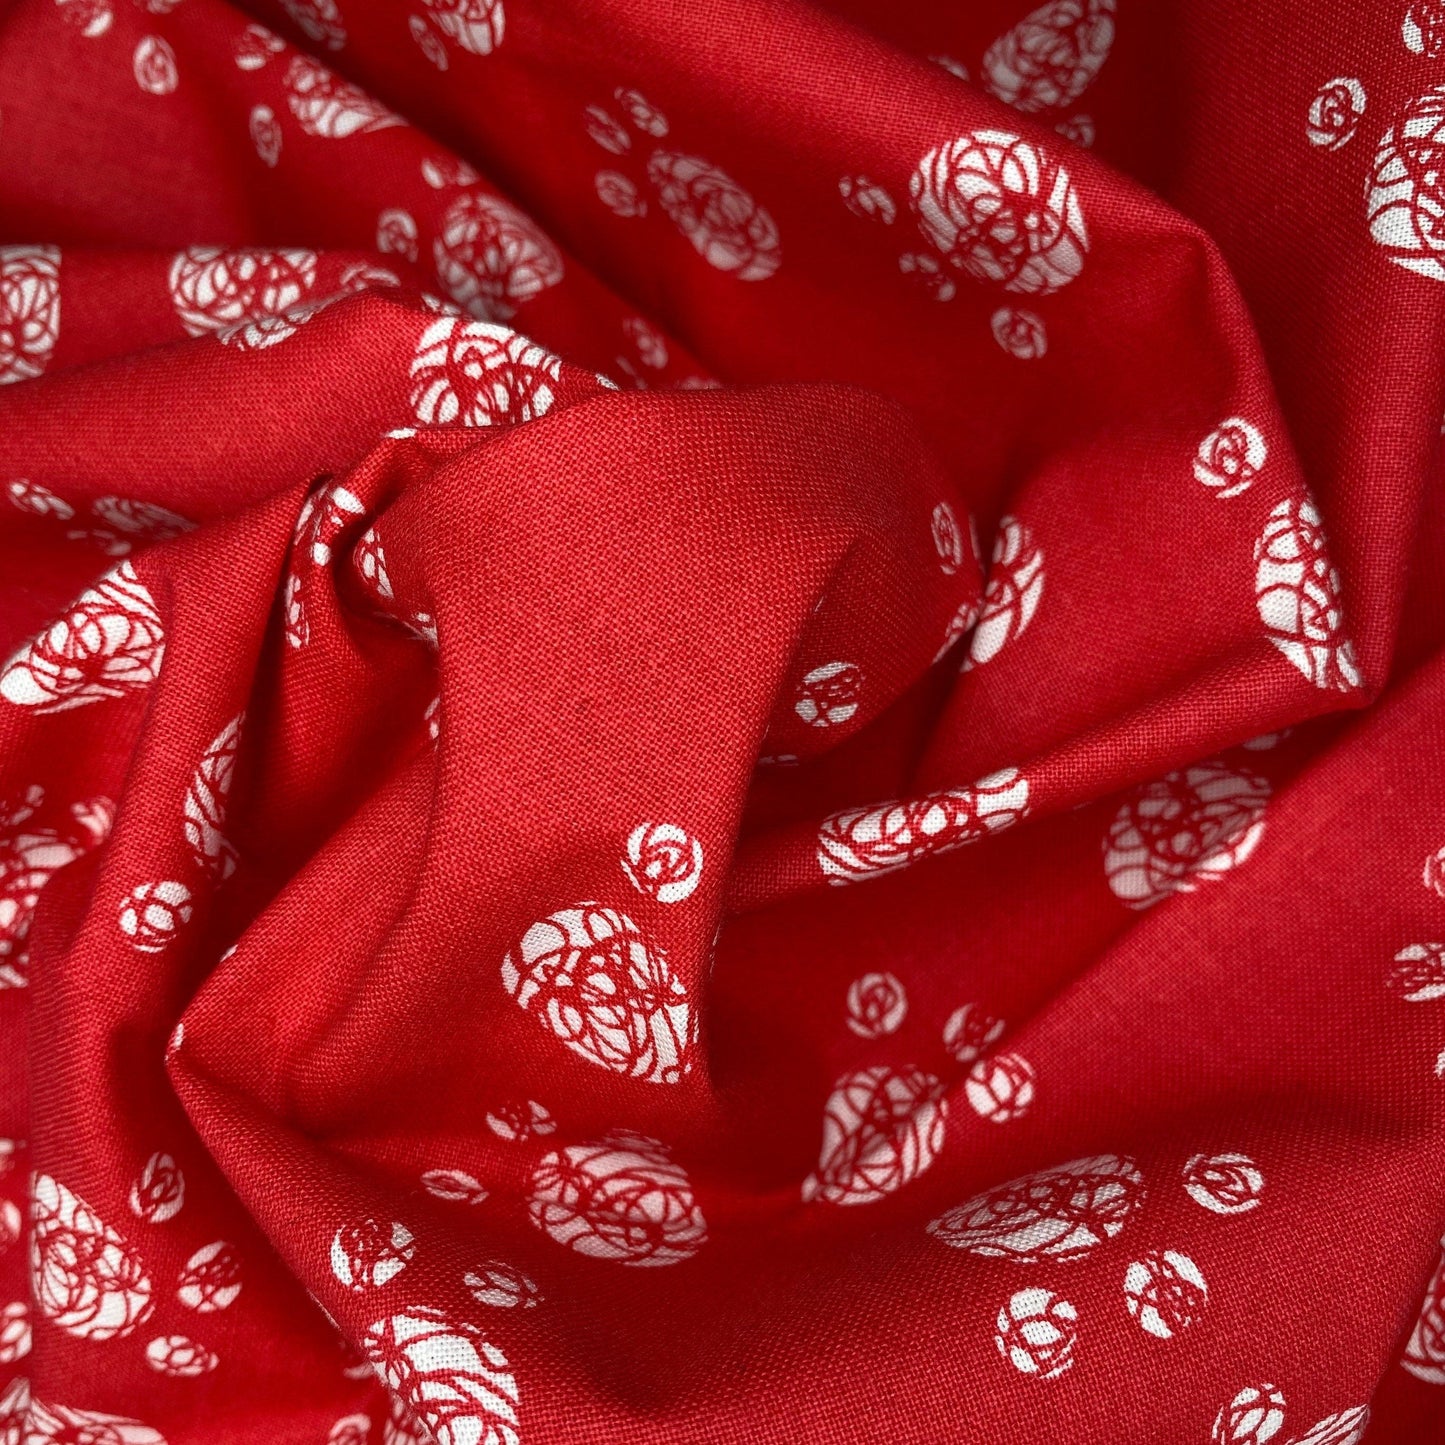 Quilting Cotton - Paw Prints - Red/White